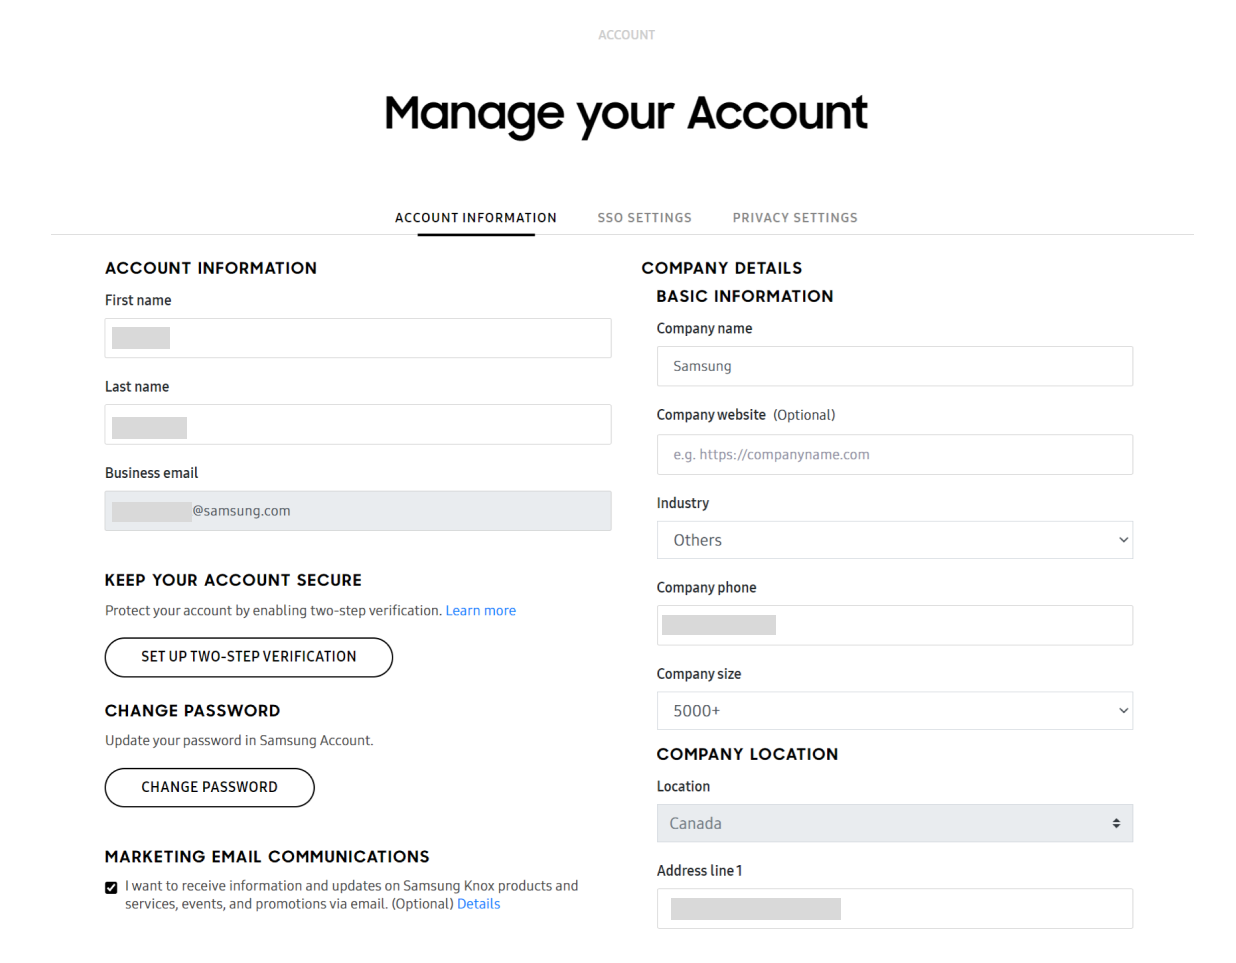 The Account Information section of the Manage your Account page.